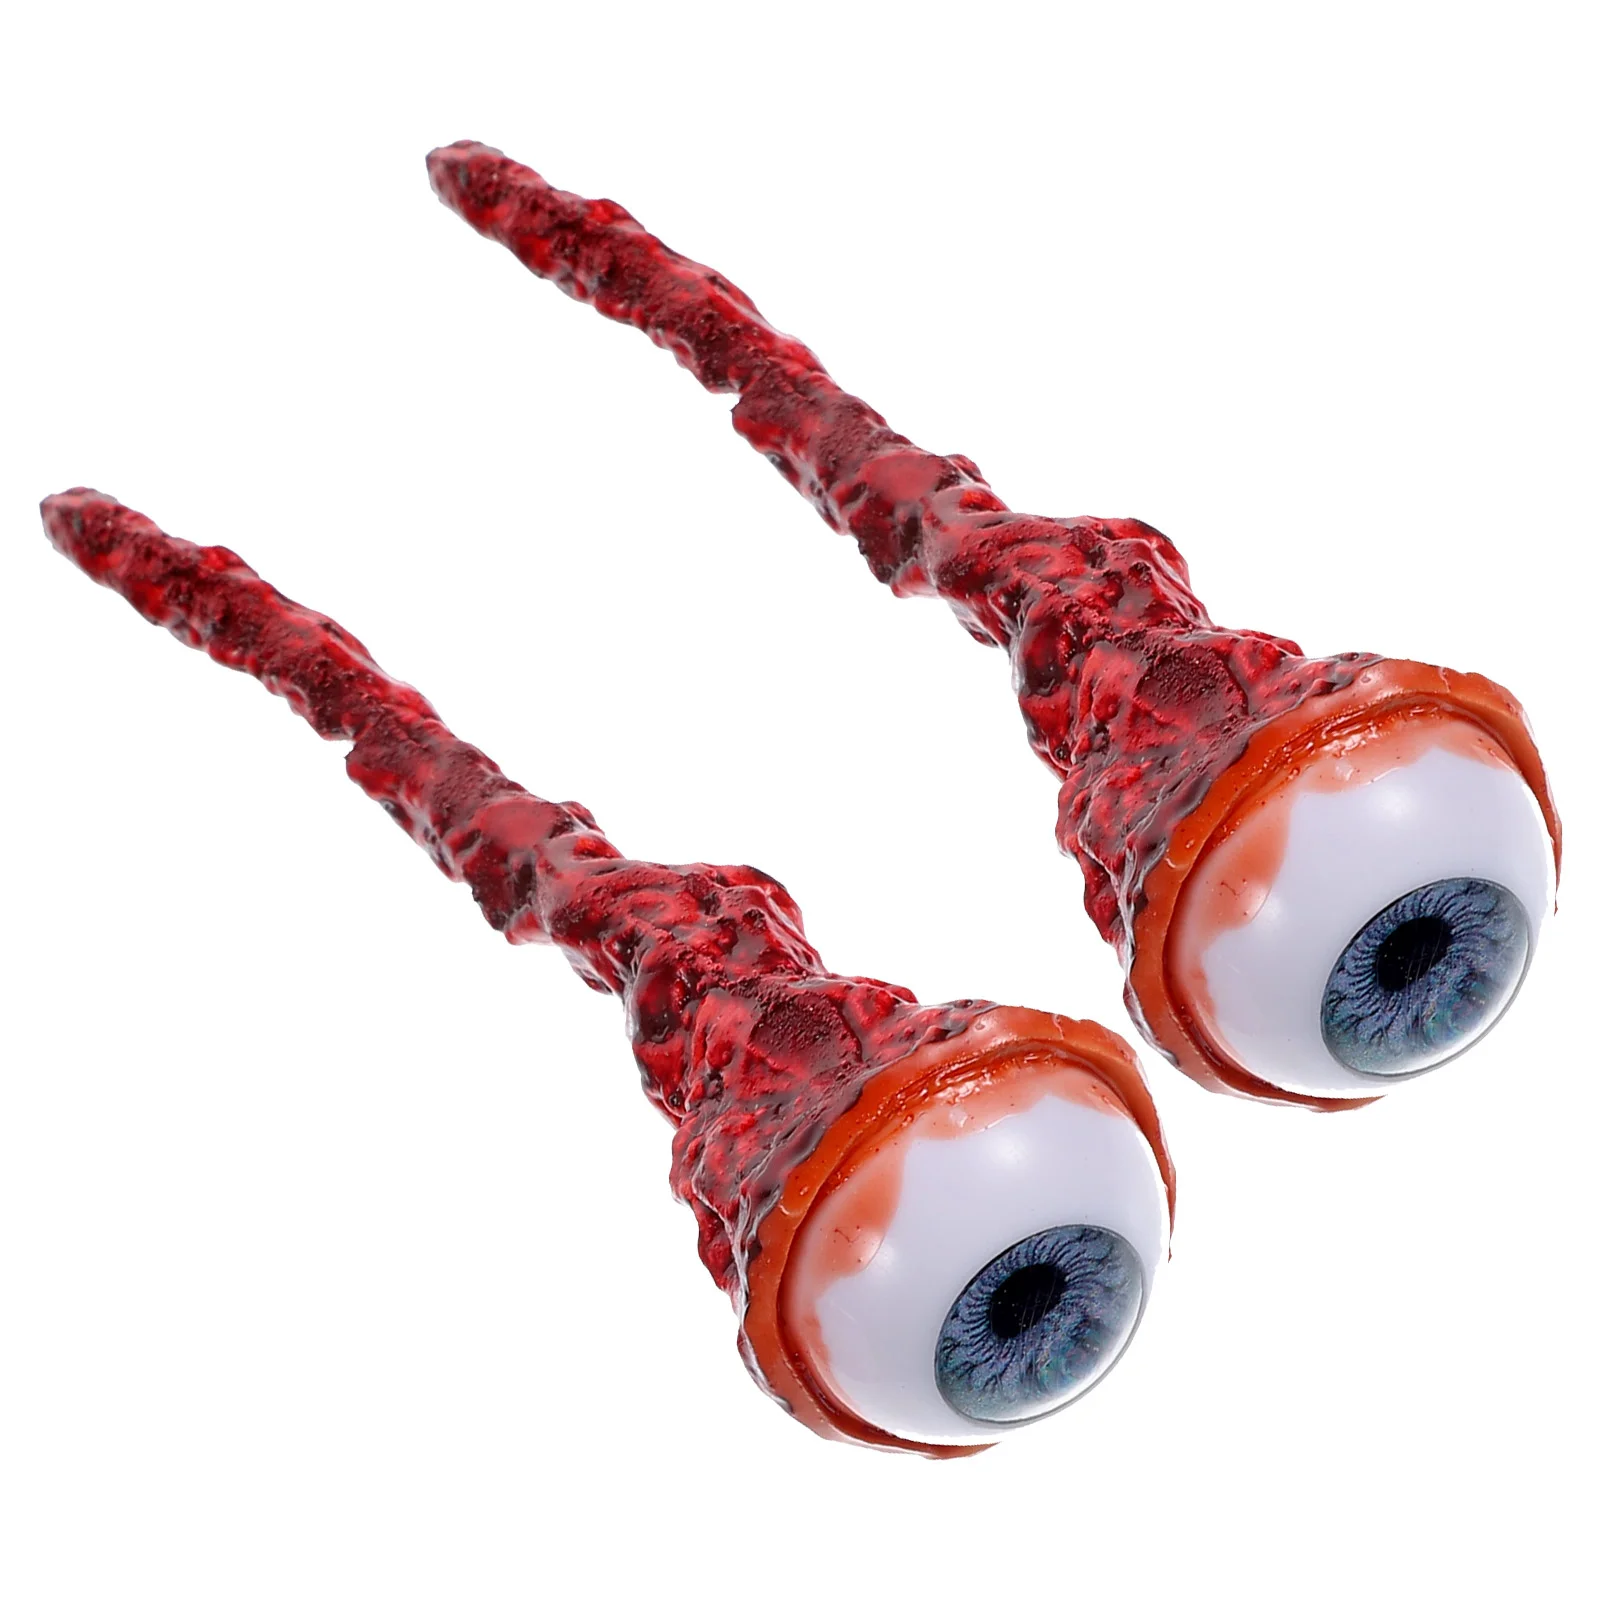 

2 Pcs Indoor Outdoor Playsets Scary Halloween Decorations Emulsion Gathering Eyeball Props